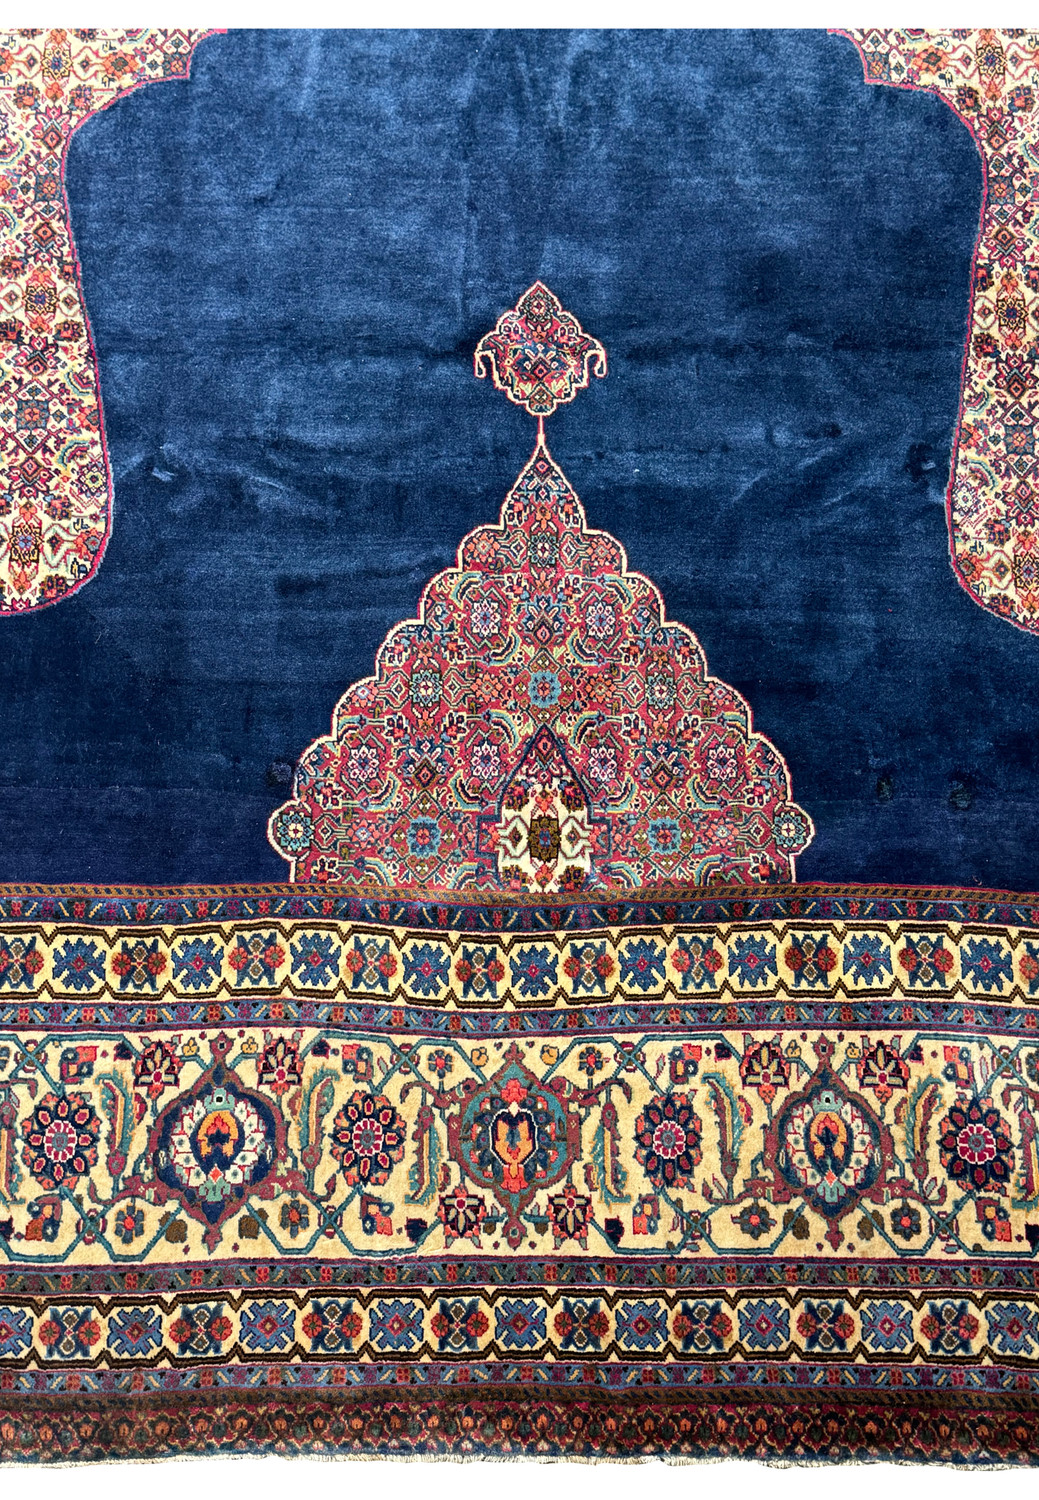 Close-up of the central mihrab design on a navy 8x8 Persian Tabriz rug.